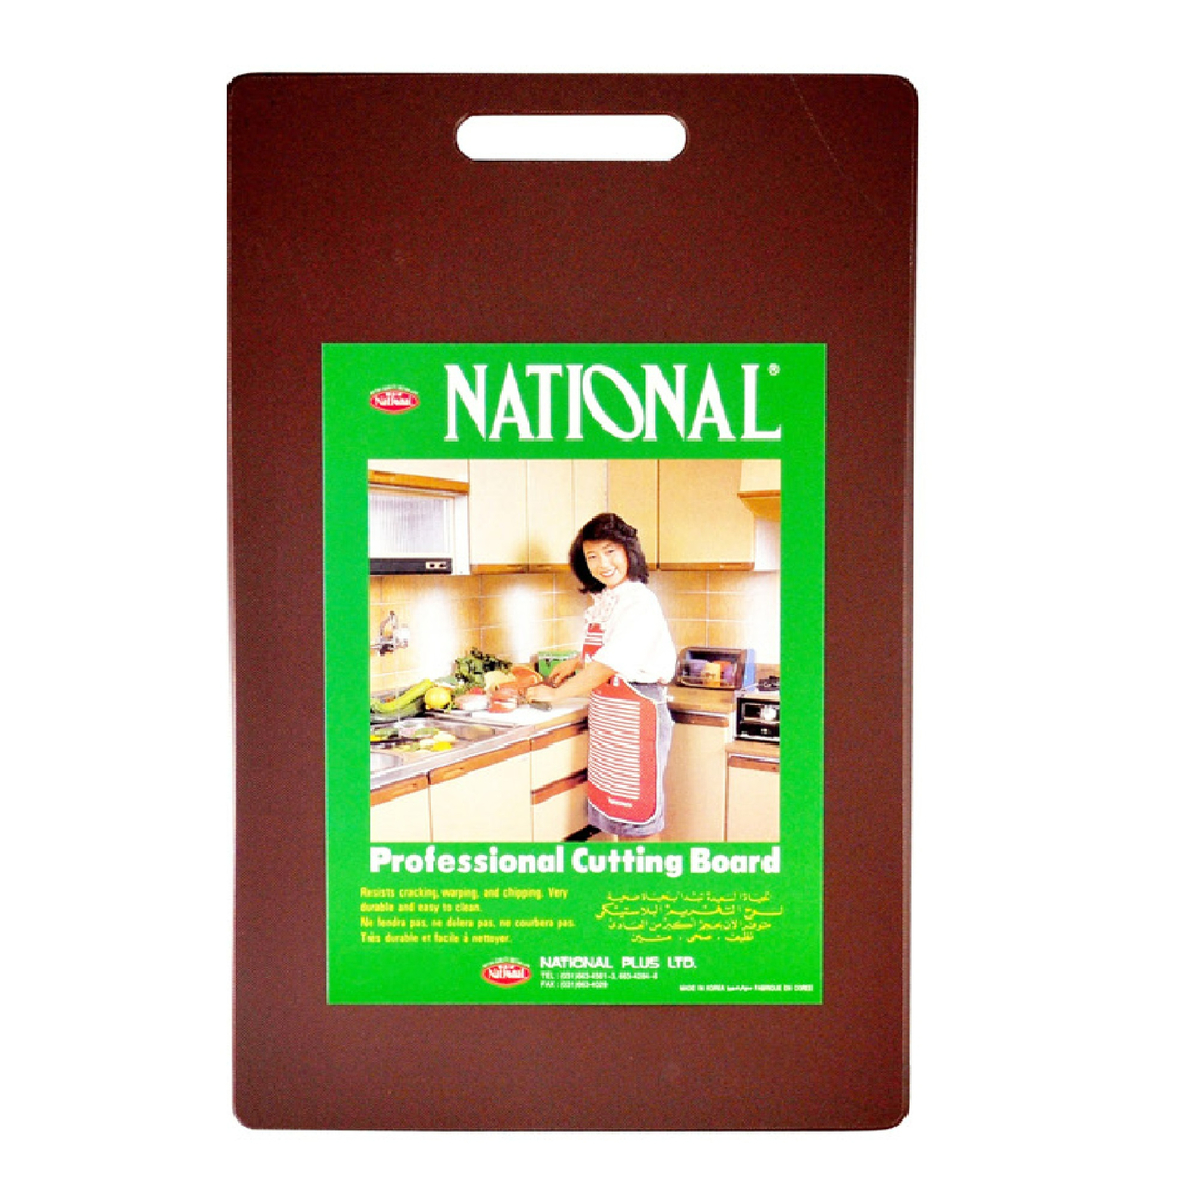 National Cutting Board, Assorted color, Large, 20 mm